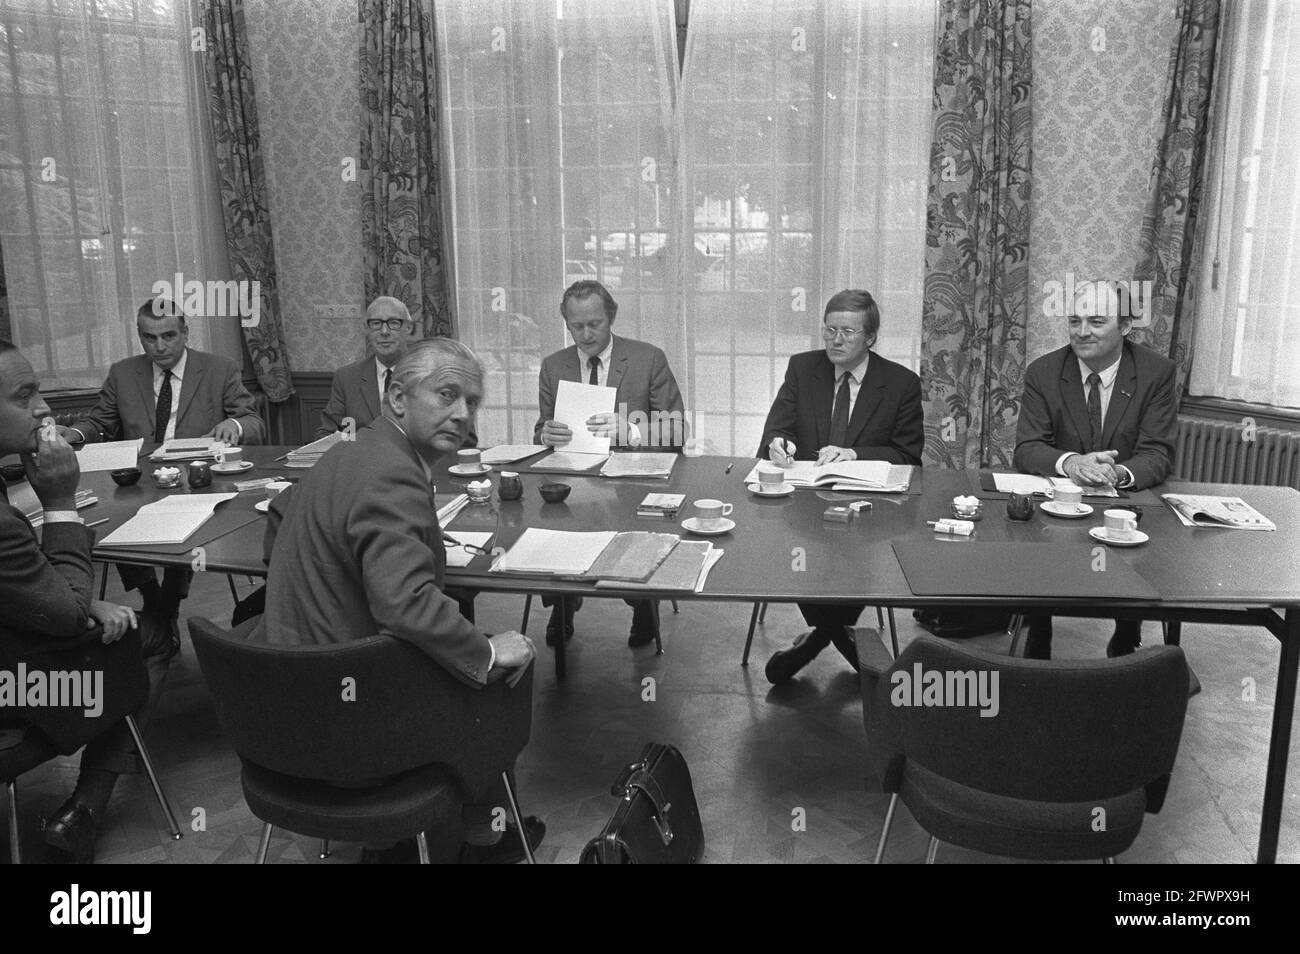 Mr. Y. Scholten receives fraction chairmen in connection with cabinet crisis, at meeting table in front Scholten and further Berger, Tilanus, Andriessen, Wiegel and Aantjes, 3 August 1972, KABINETSCRIS, receipts, The Netherlands, 20th century press agency photo, news to remember, documentary, historic photography 1945-1990, visual stories, human history of the Twentieth Century, capturing moments in time Stock Photo